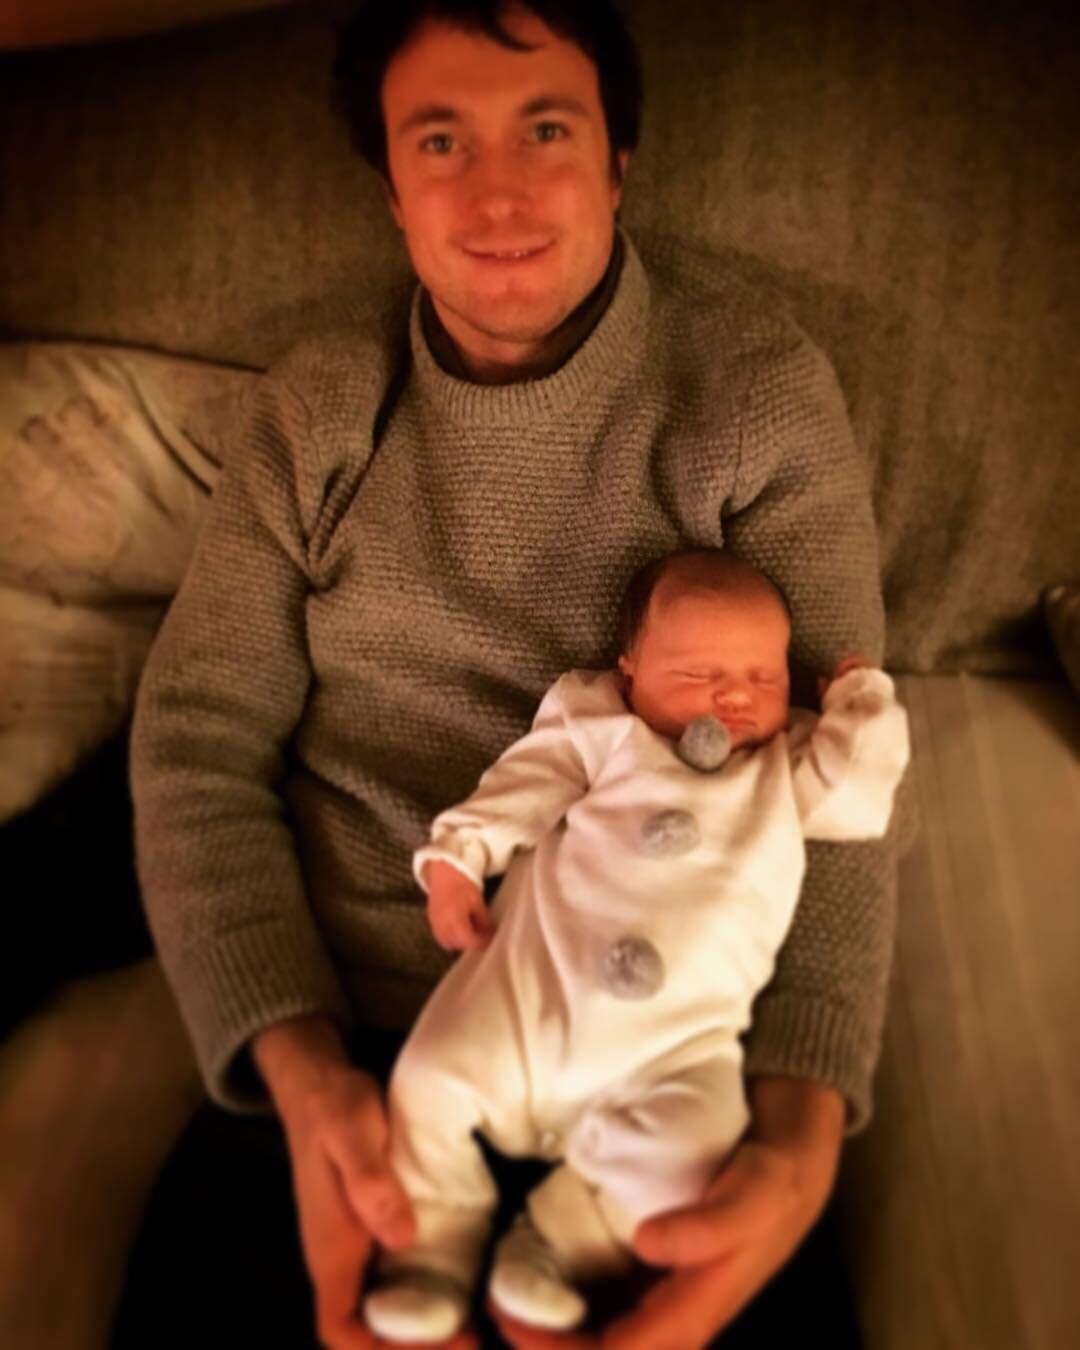 Son in law with his beautiful new daughter, Clemmie #newborn #clemmie #christmastime #vaughansbnb  #shere #surreyhills #sherebnb #airbnb #countryside #countrywalks🌿